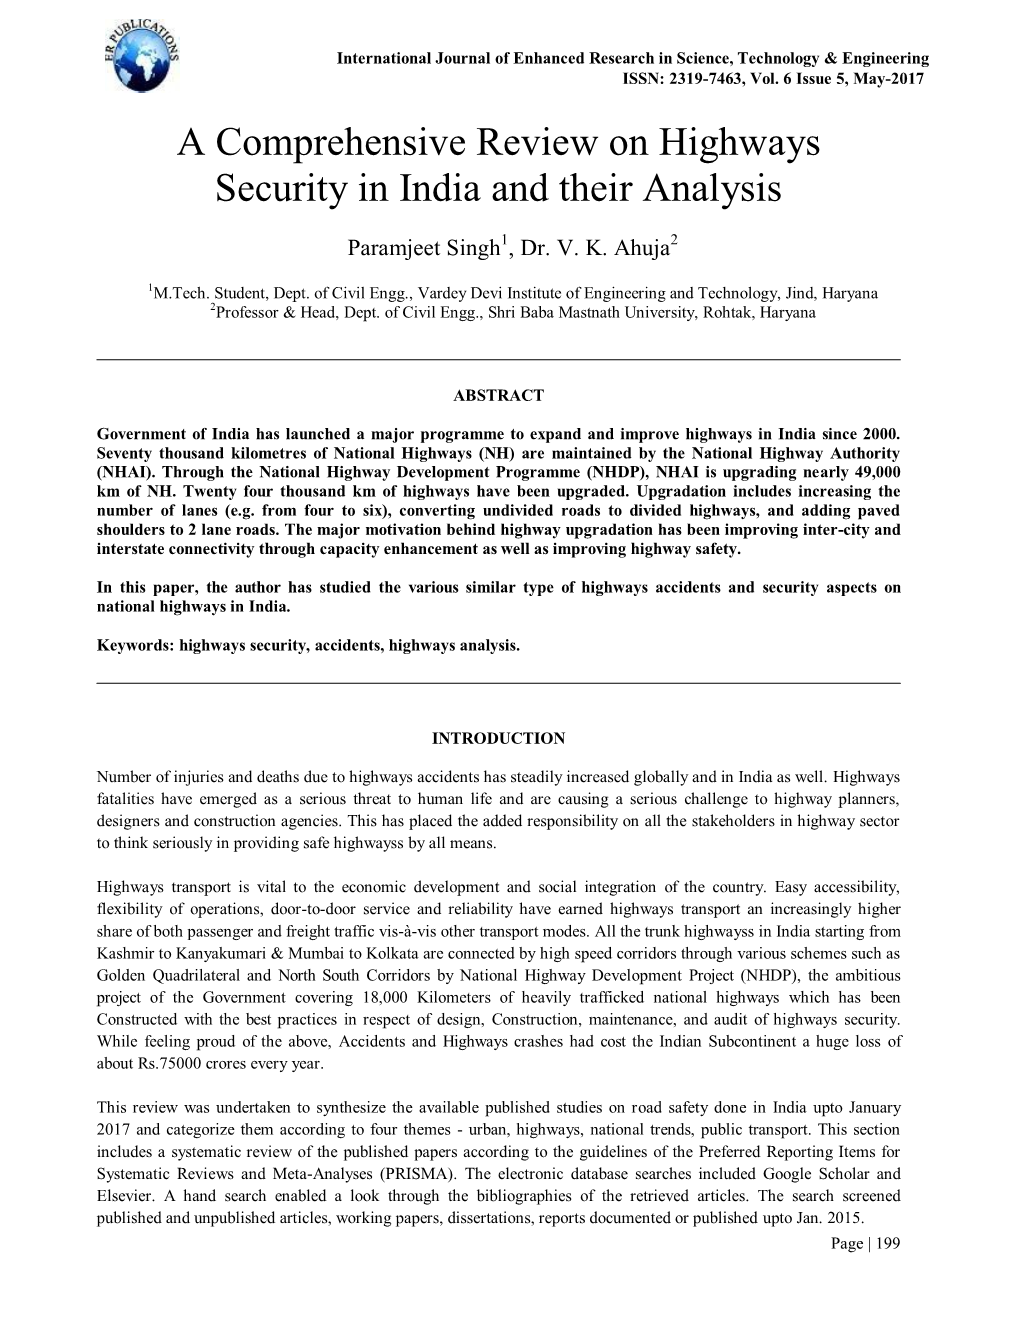 A Comprehensive Review on Highways Security in India and Their Analysis